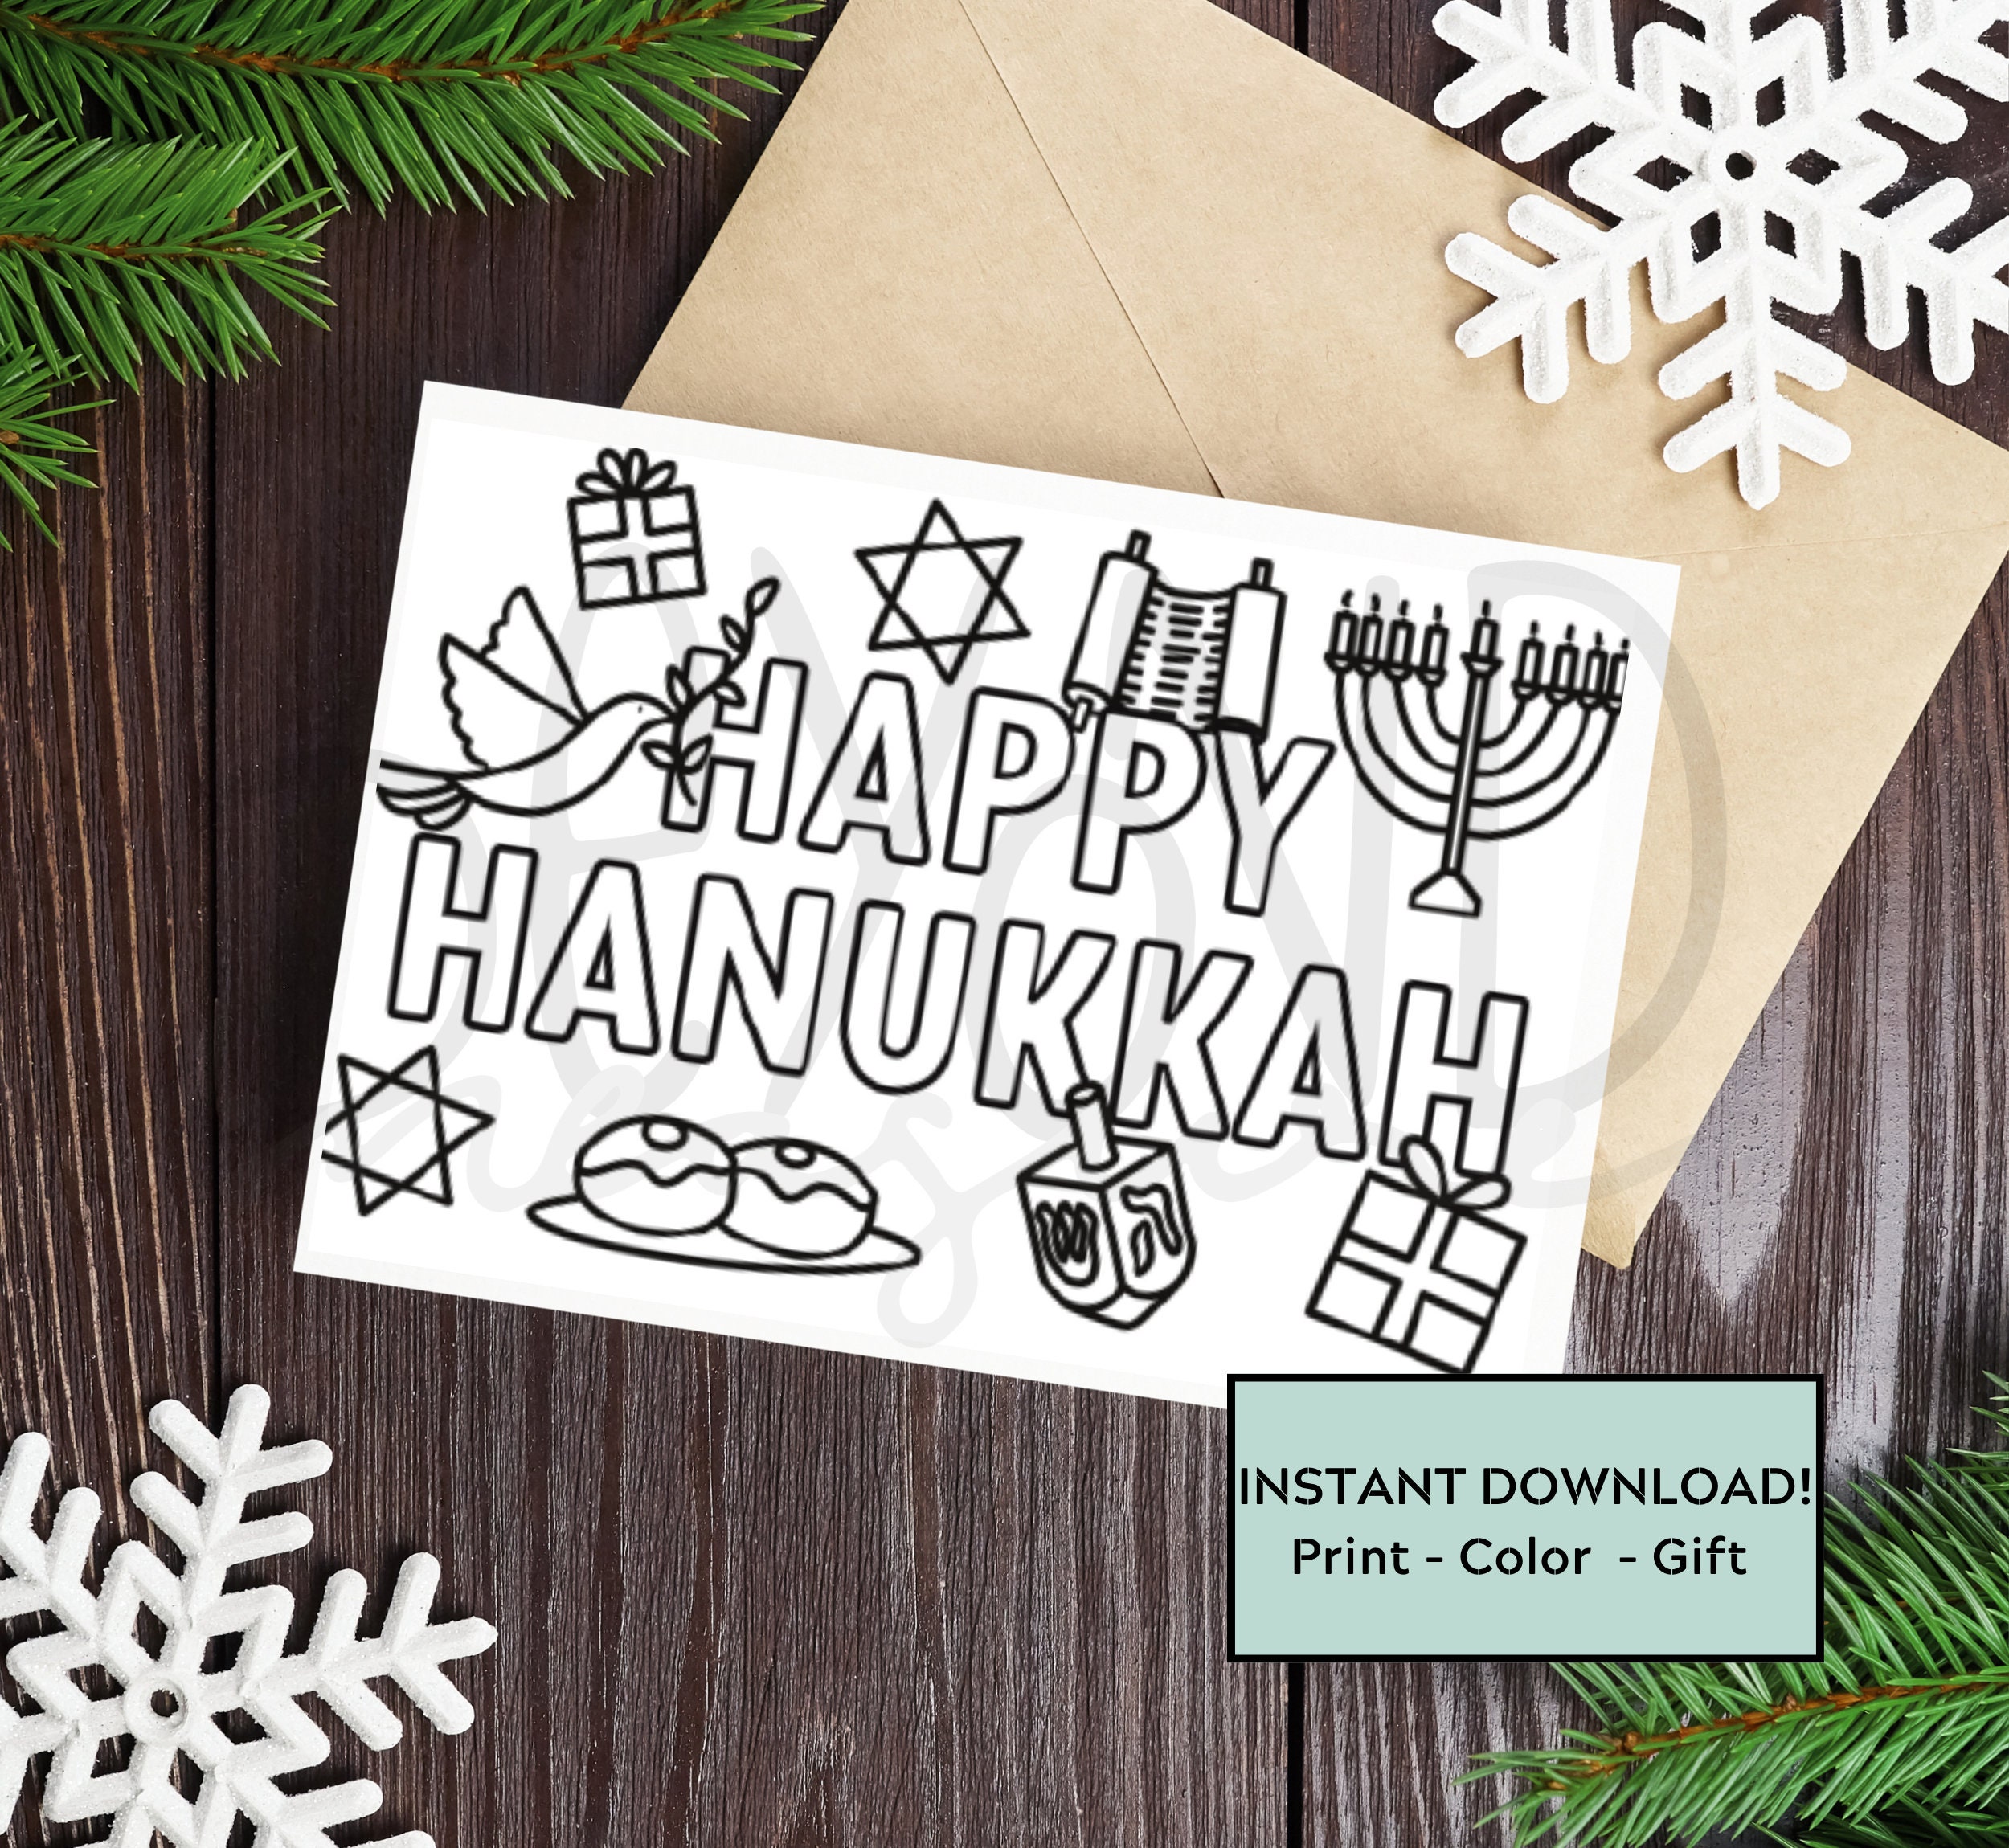 New Free Printable Magnetic Paper Dolls for Hanukkah • Paper Thin